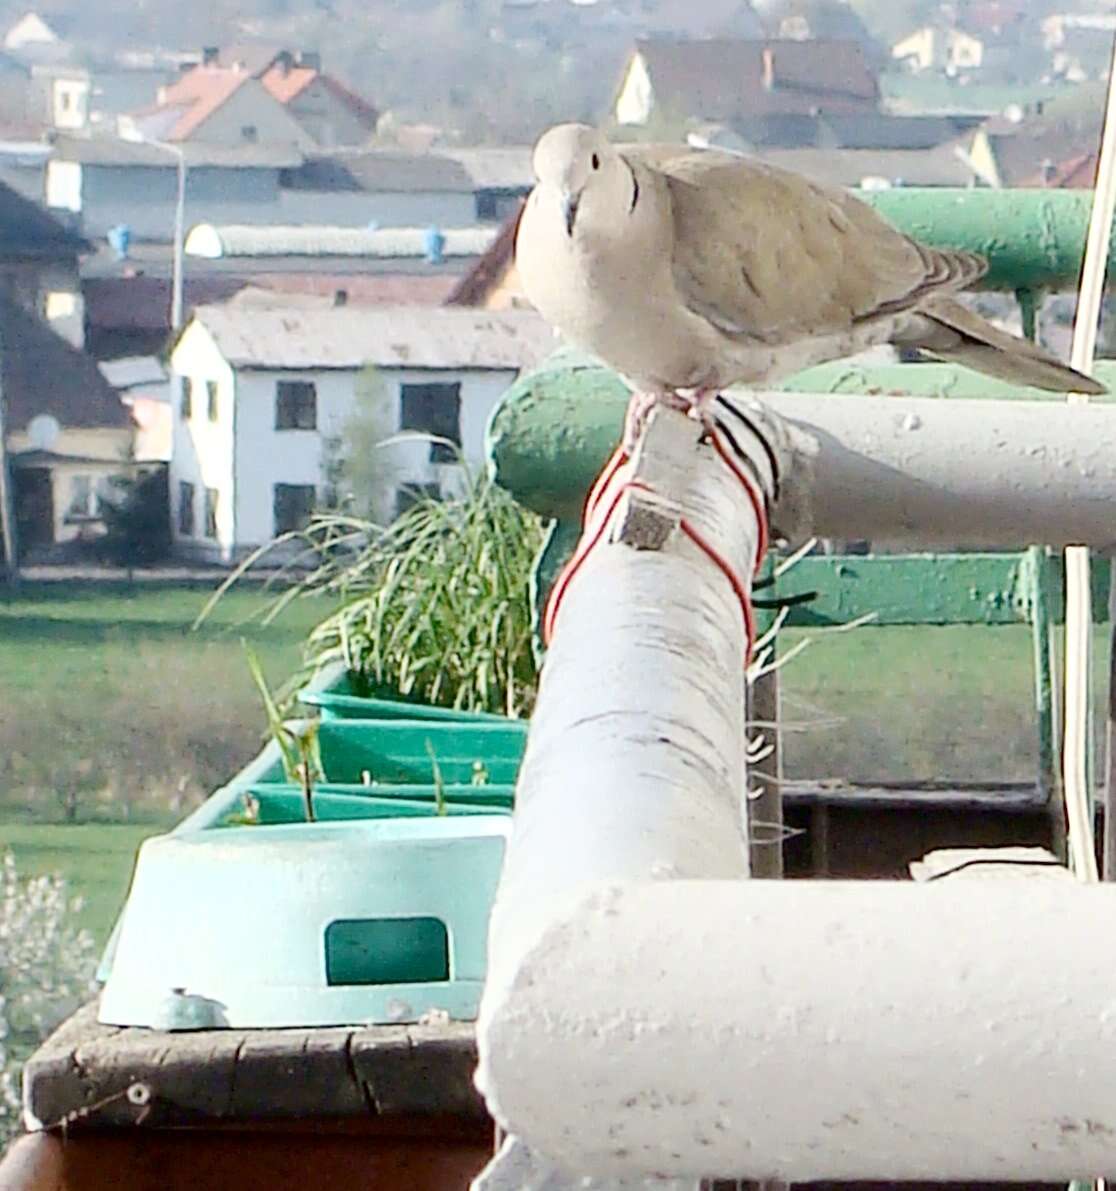 Image of Collared Dove